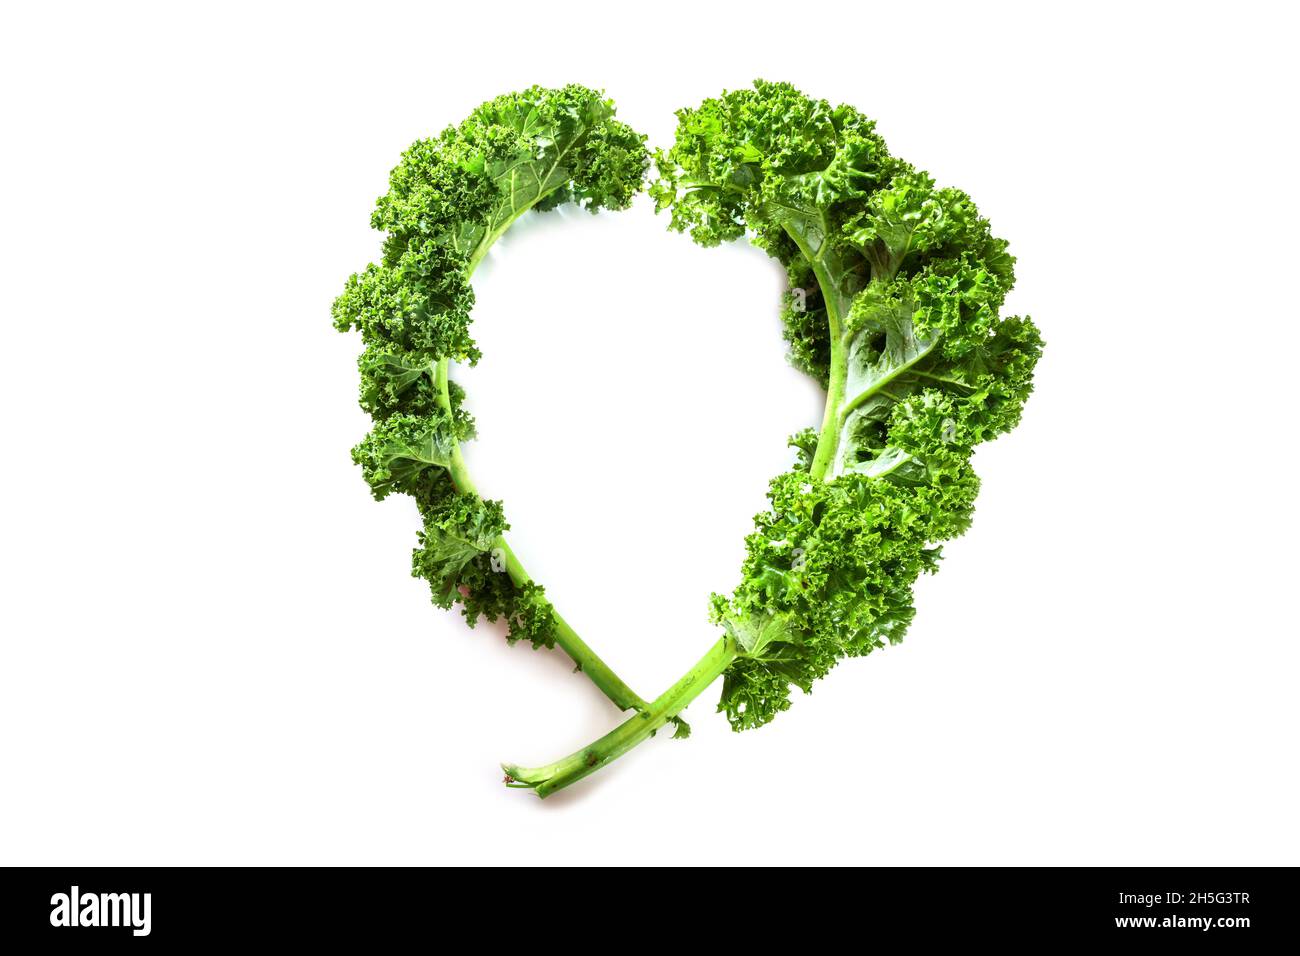 Winter vegetable kale or green leaf cabbage, two curly leaves in the shape of a heart, isolated on a white background, healthy eating concept, copy sp Stock Photo